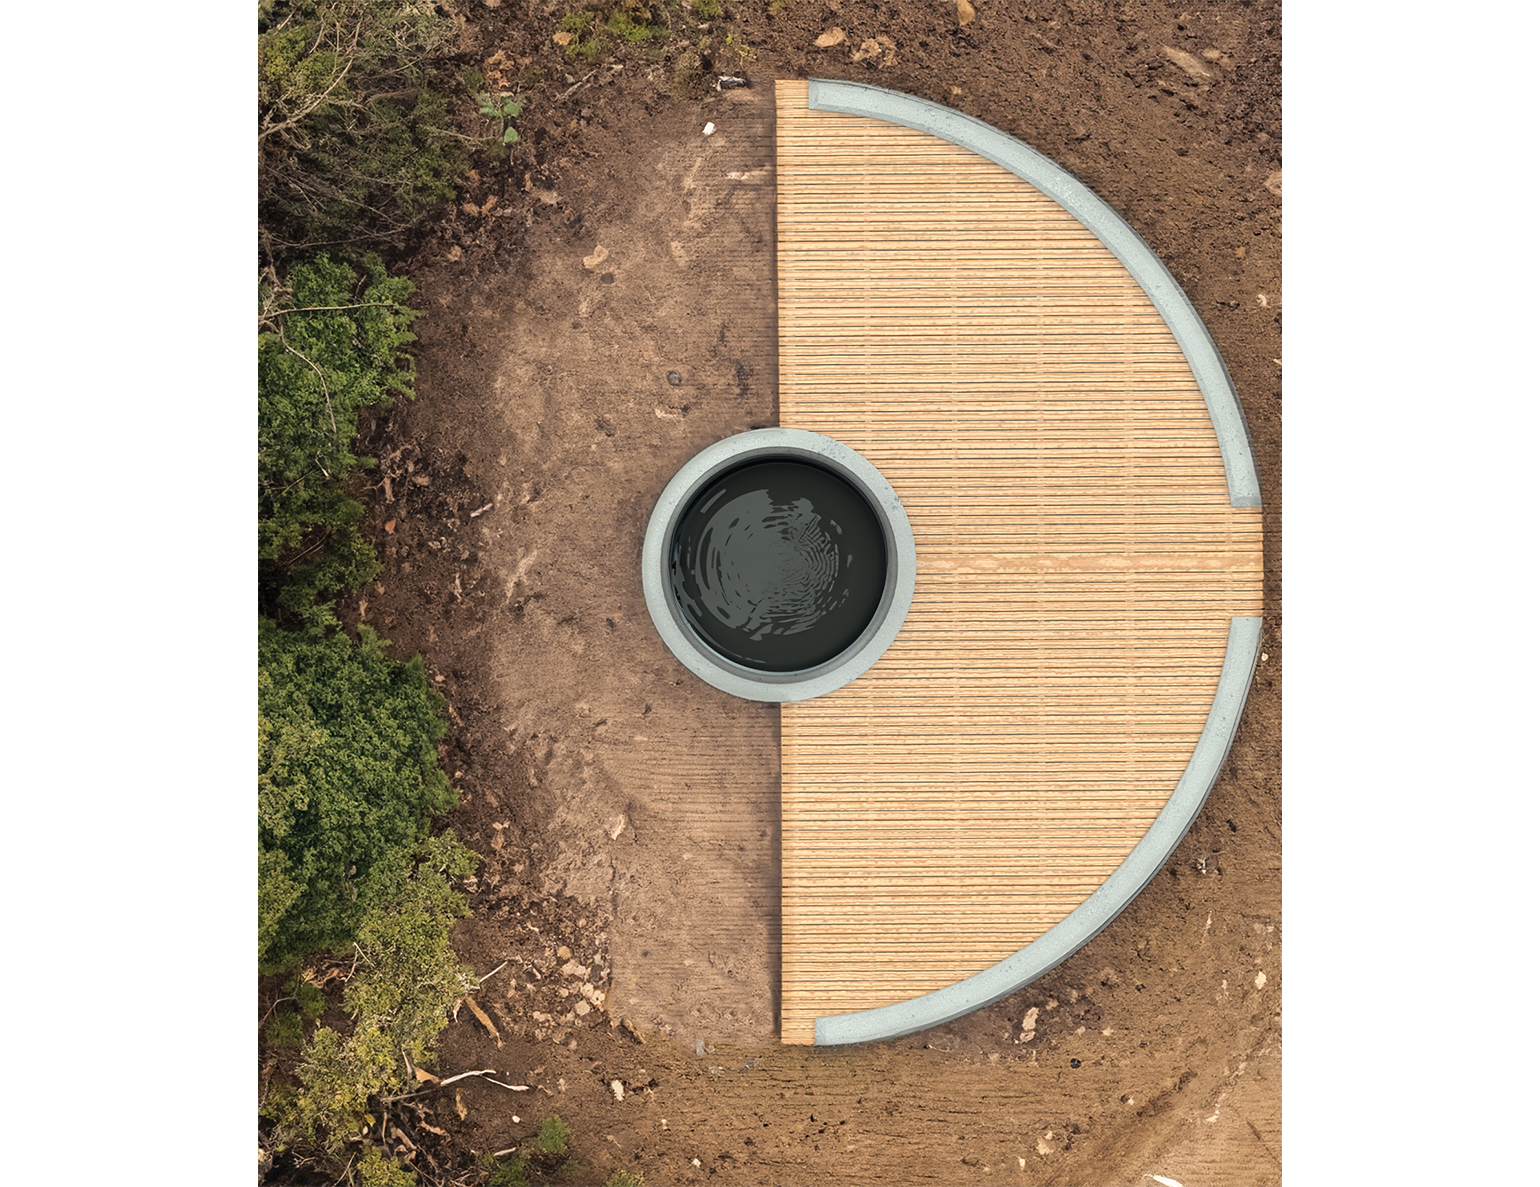 An aerial view of a circular water feature with a wooden deck on a semicircular border, surrounded by natural terrain.